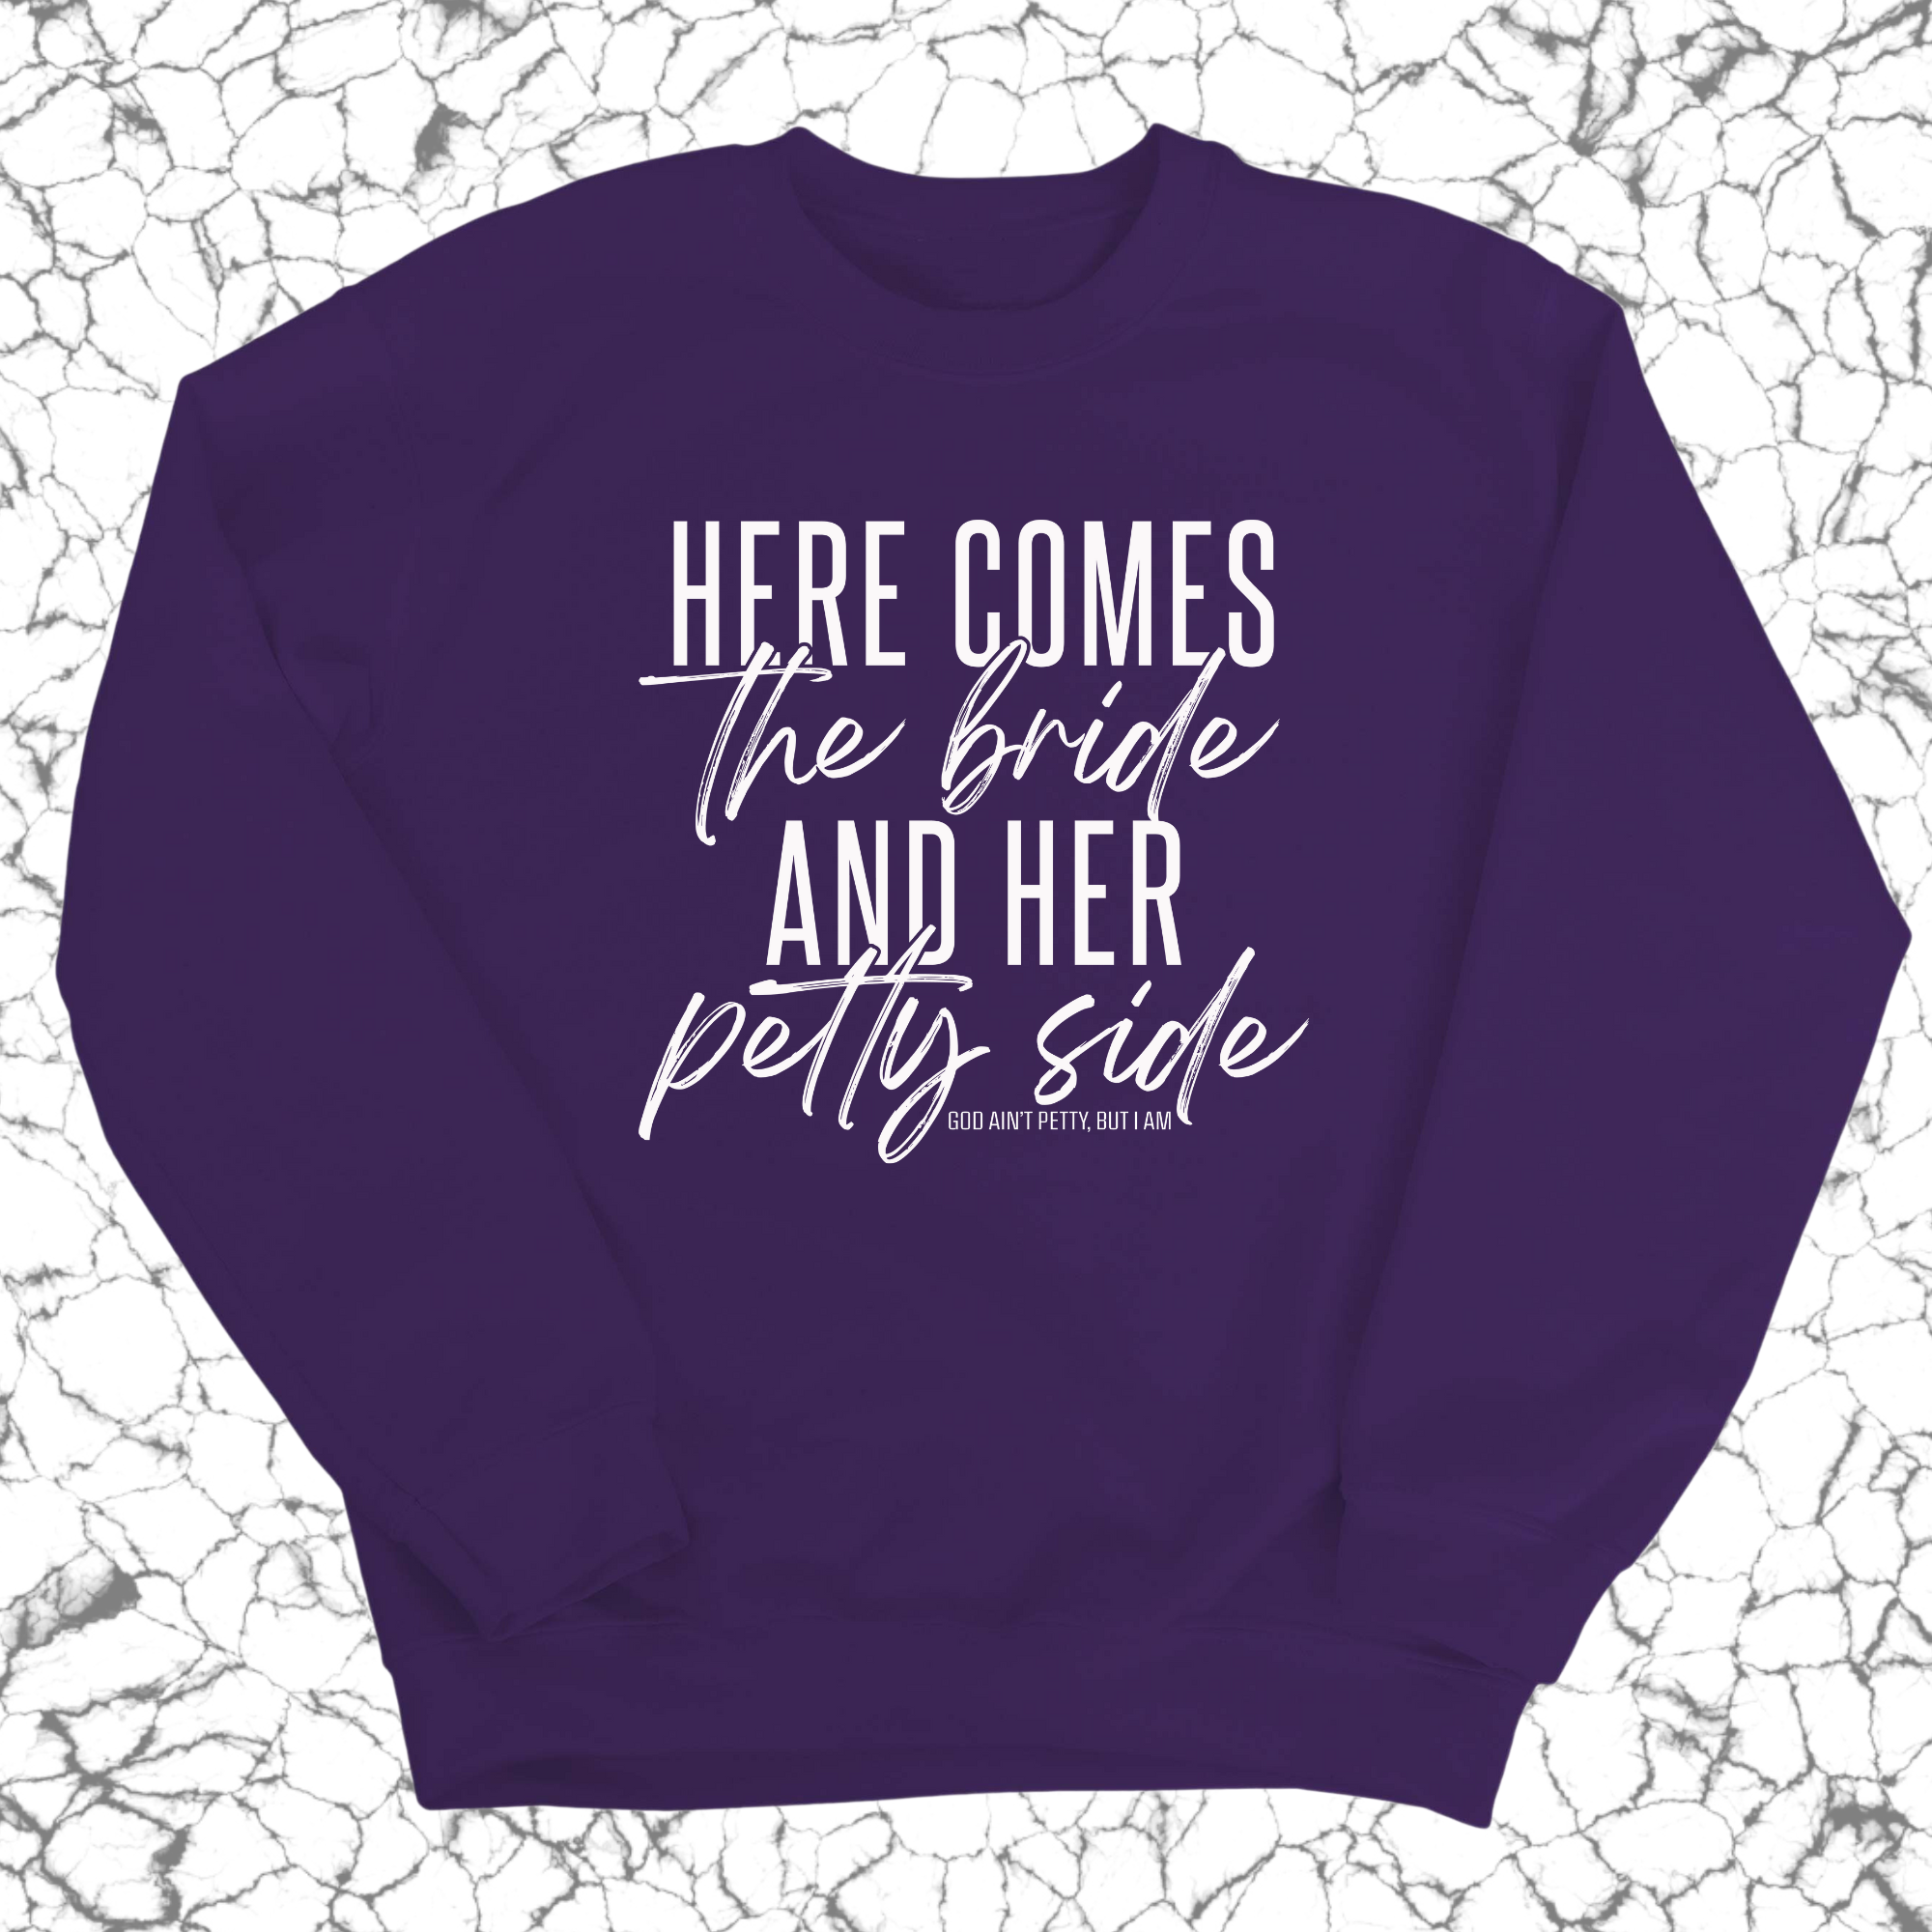 Here comes the bride and her Petty side Unisex Sweatshirt-Sweatshirt-The Original God Ain't Petty But I Am